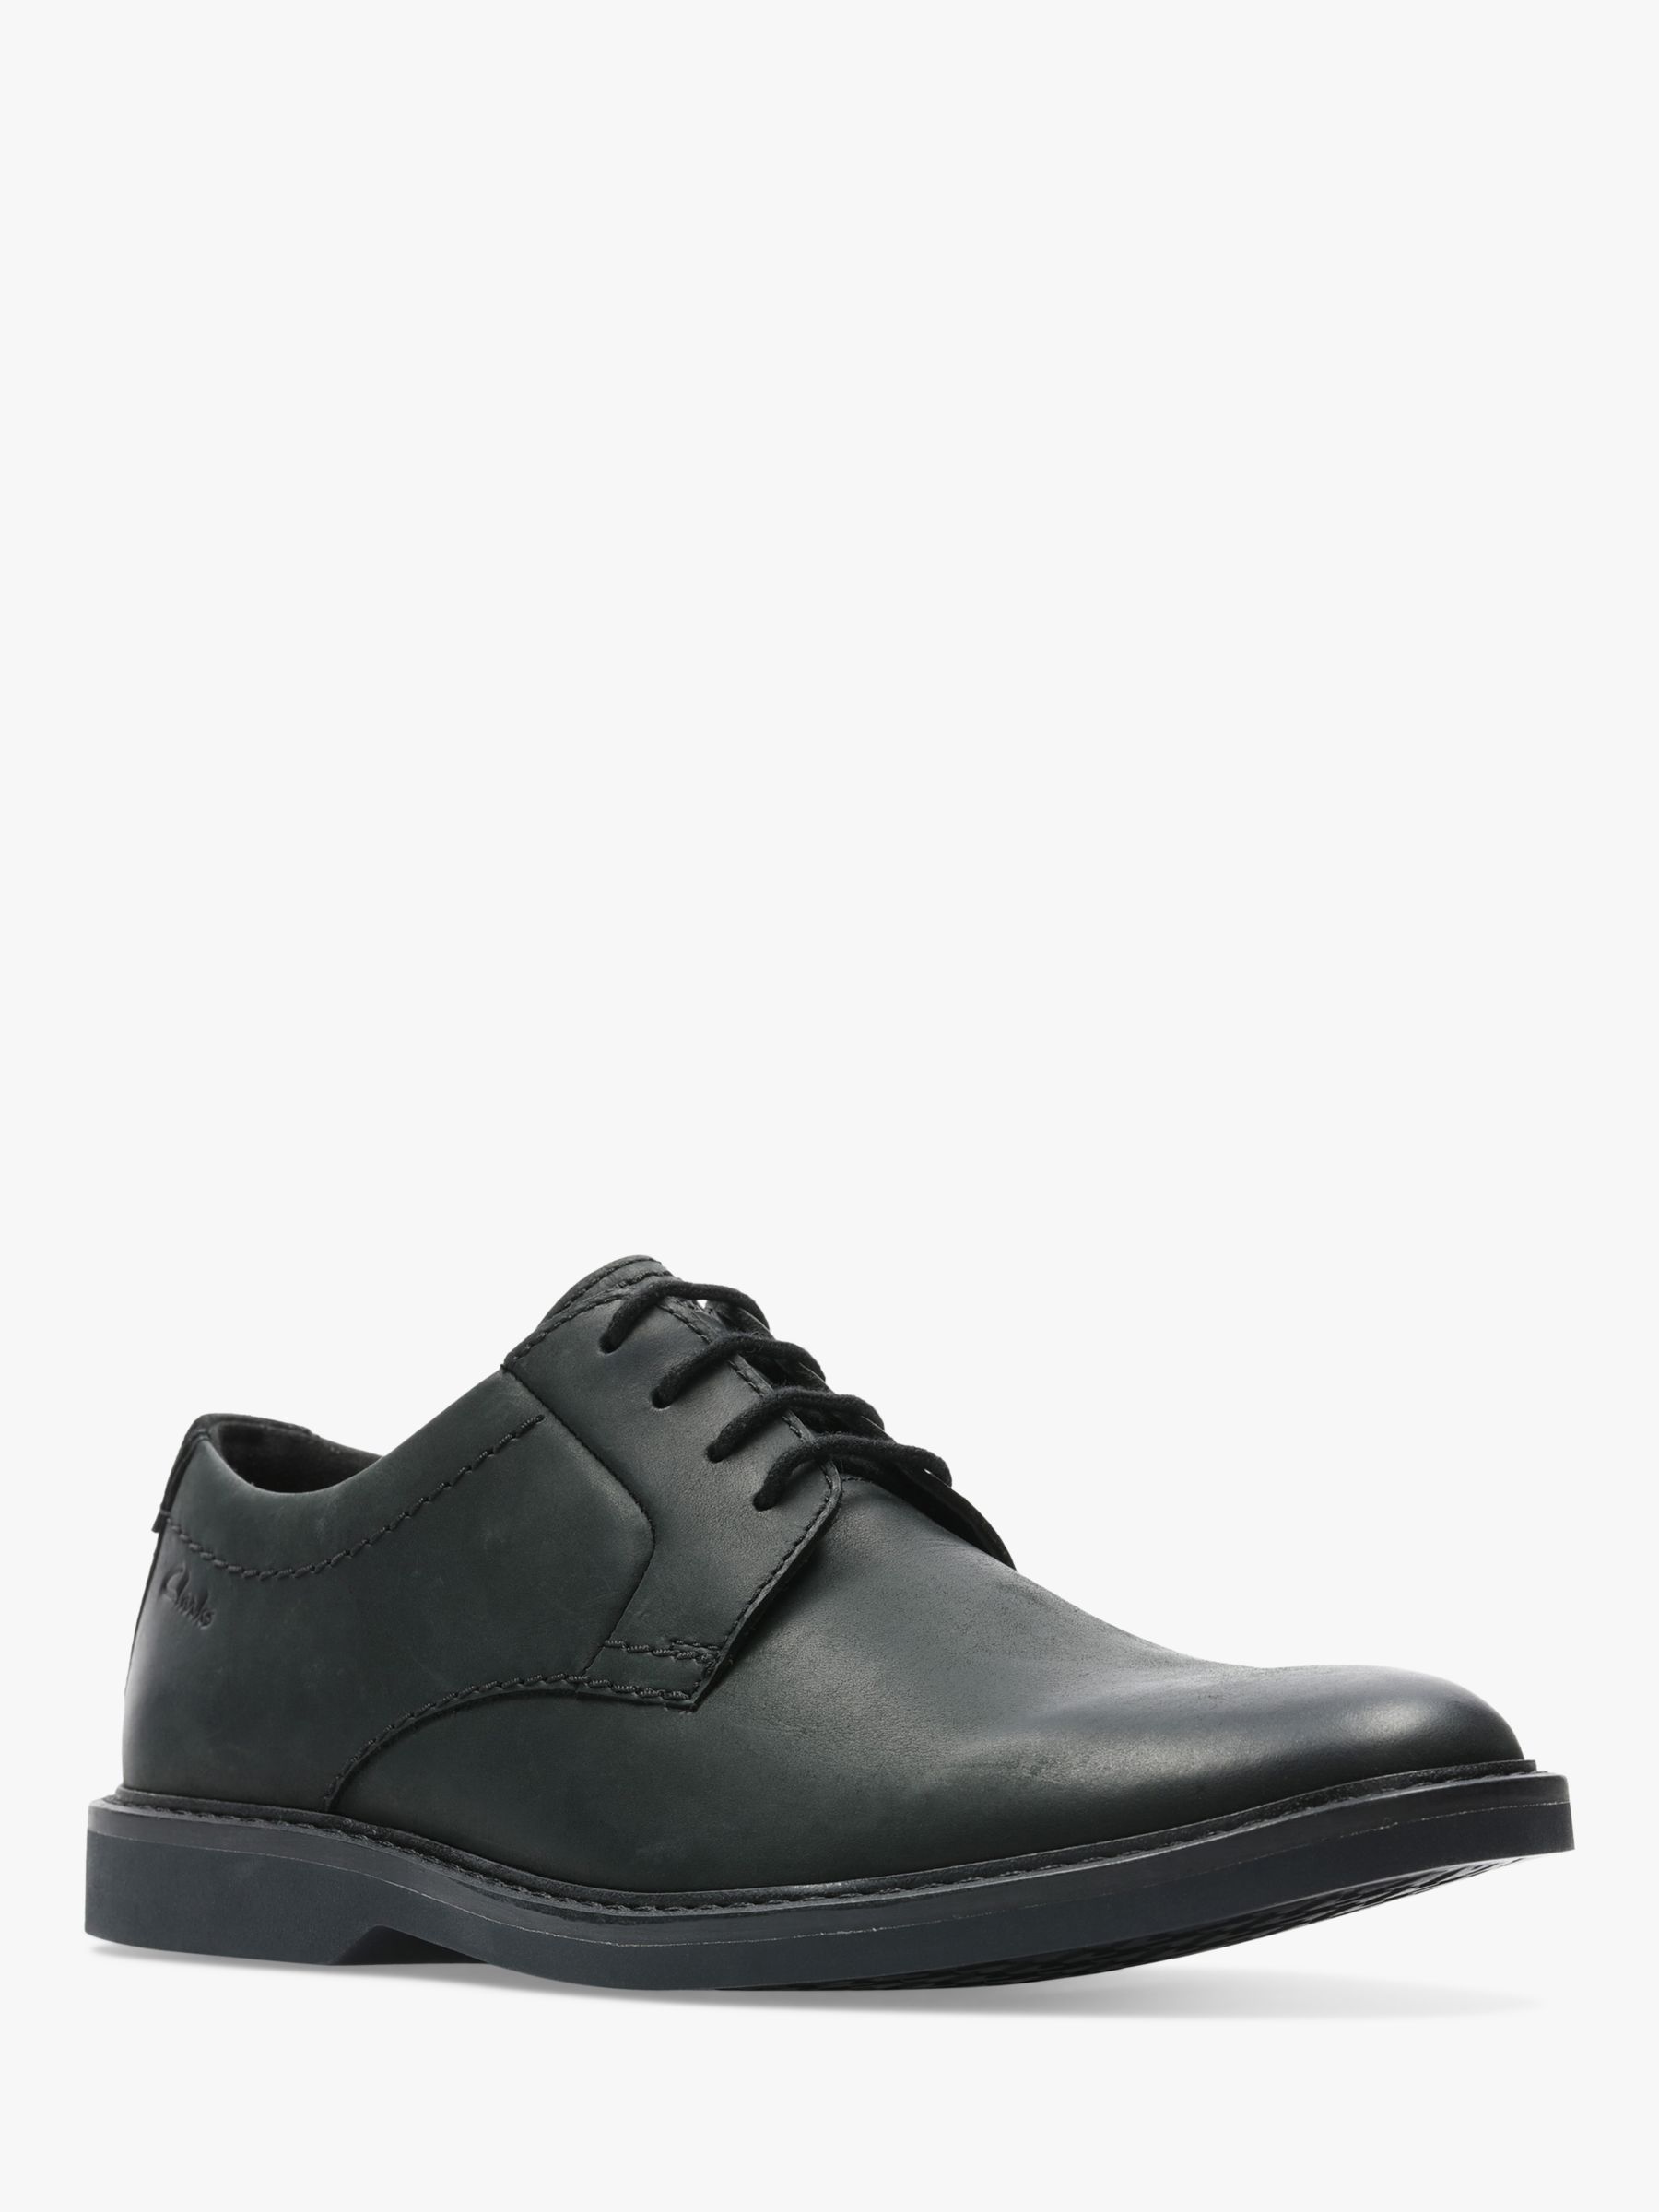 Clarks Atticus Leather Casual Shoes, Black at John Lewis & Partners